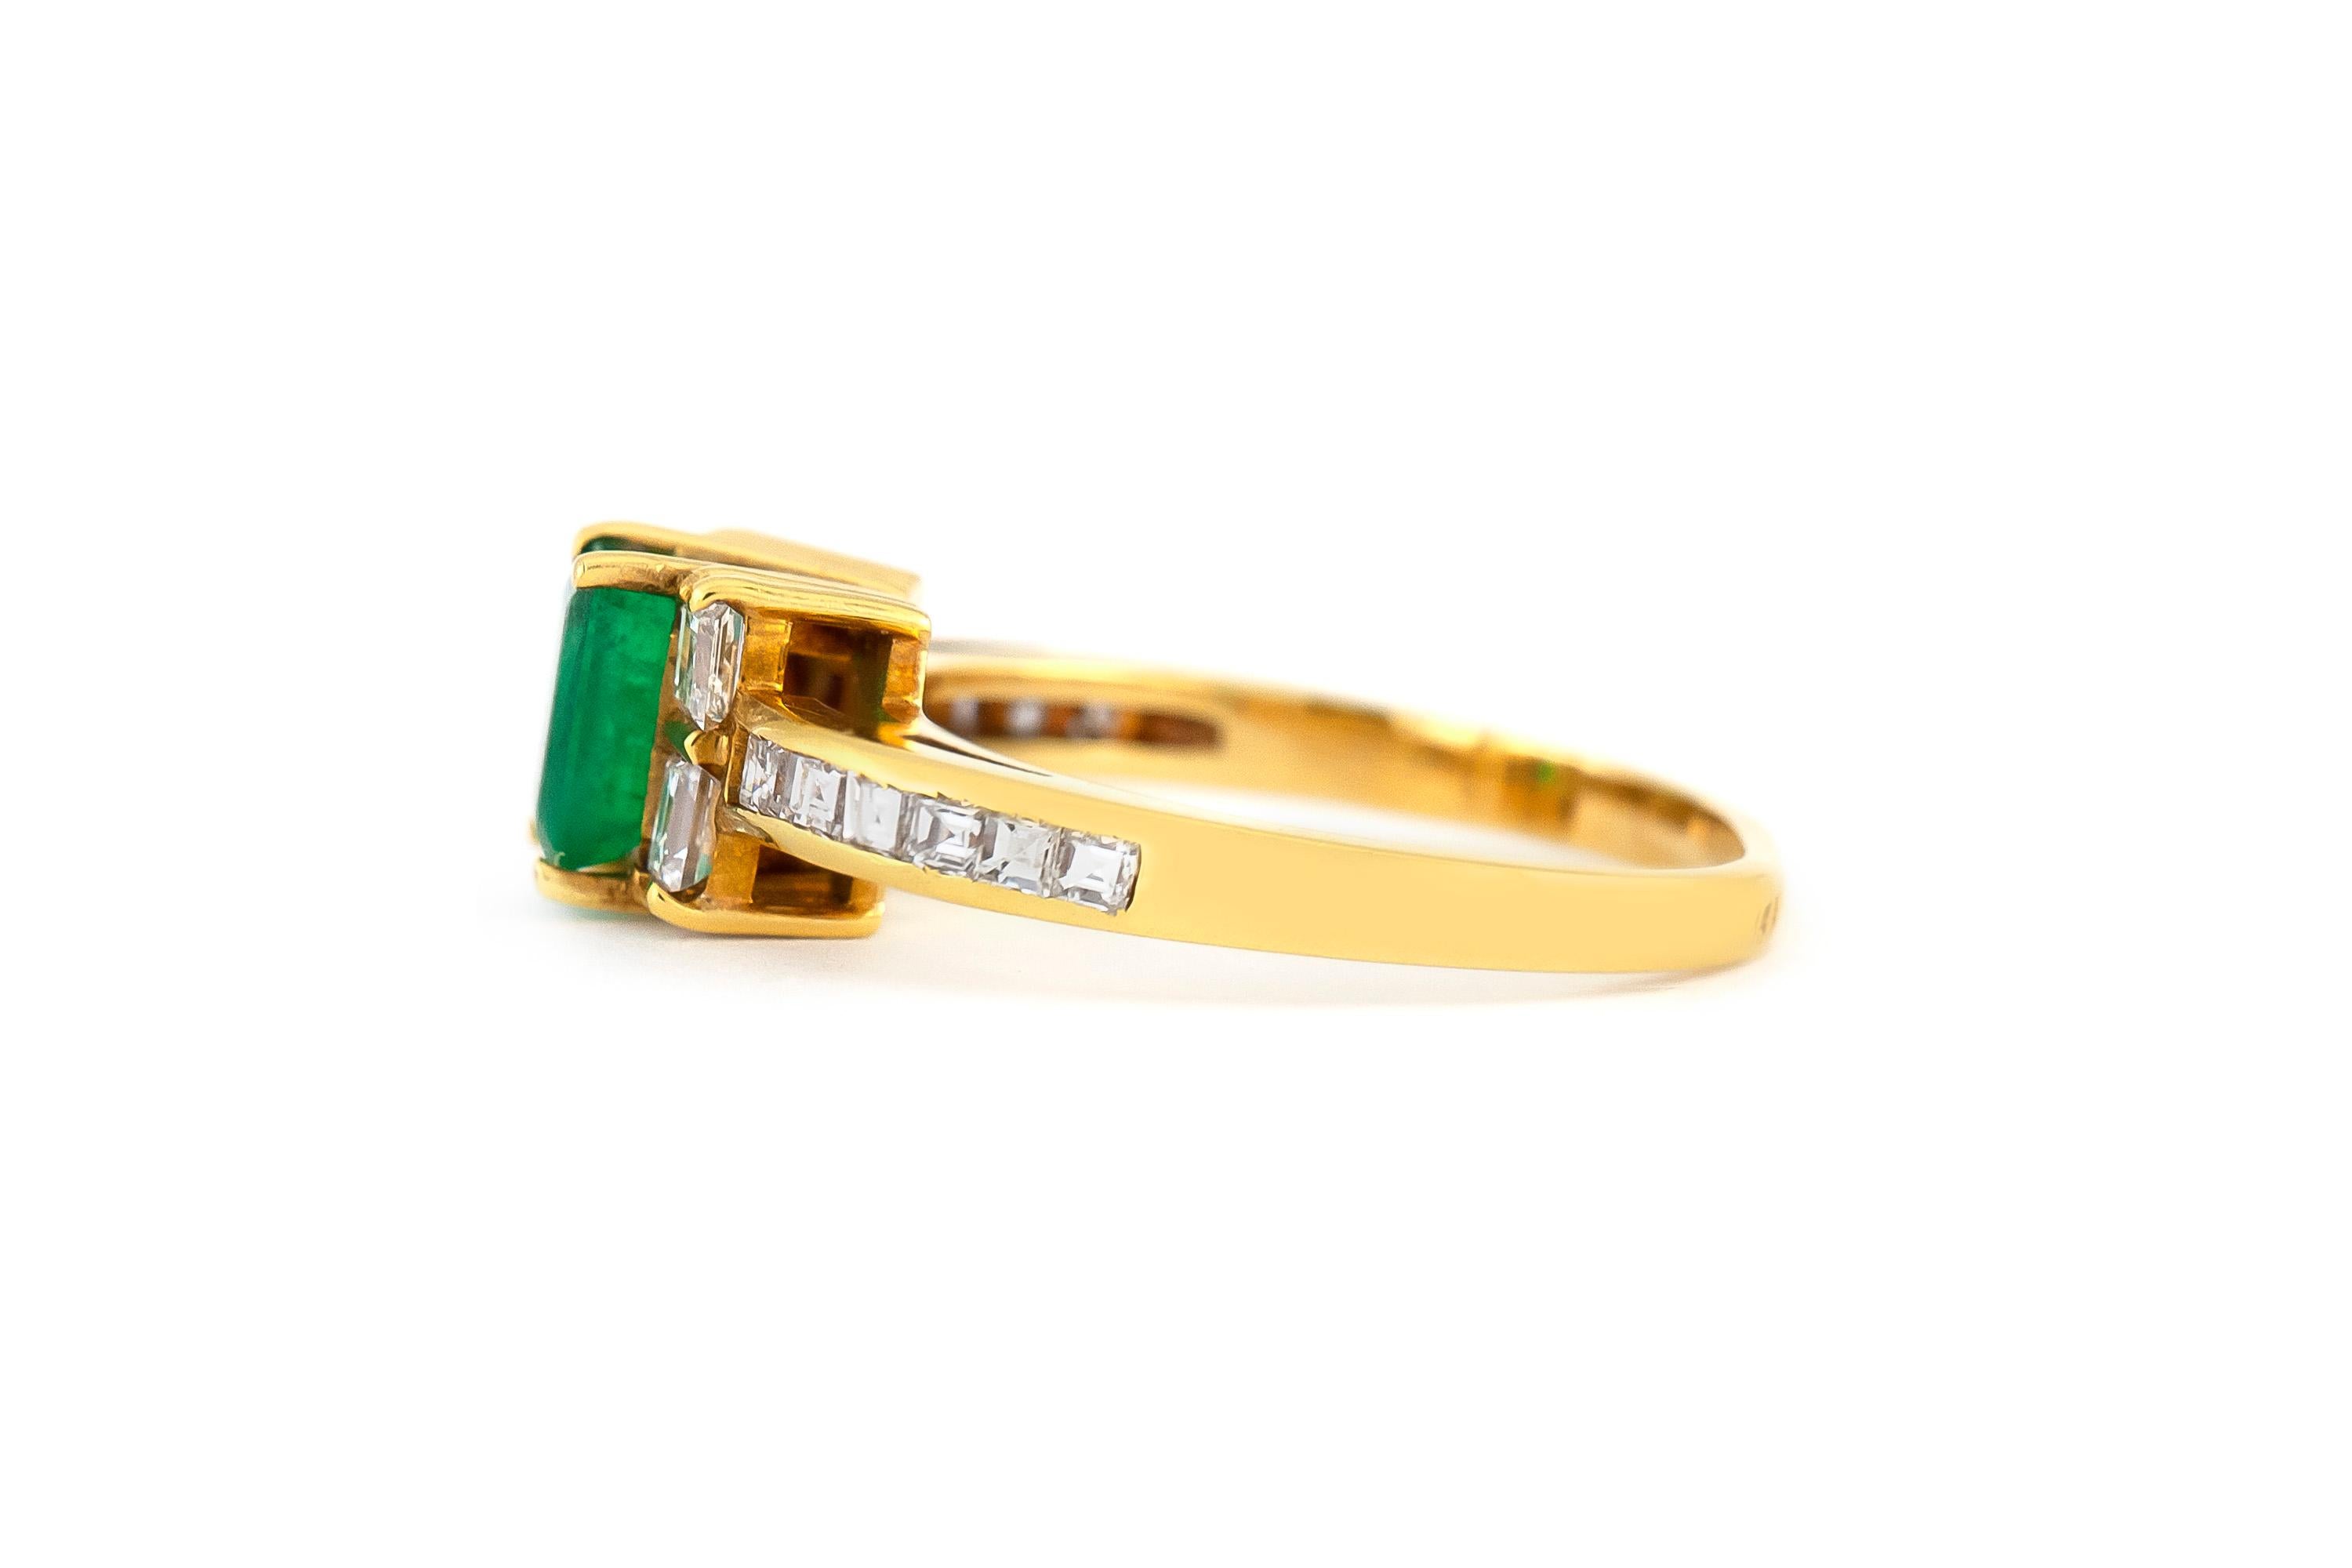 The ring is finely crafted in 18k yellow gold with center emerald emerald cut weighing approximately total of 0.80 carat and diamonds emerald cut and square cut weighing approximately total of 1.00 carat.
Circa 1980.